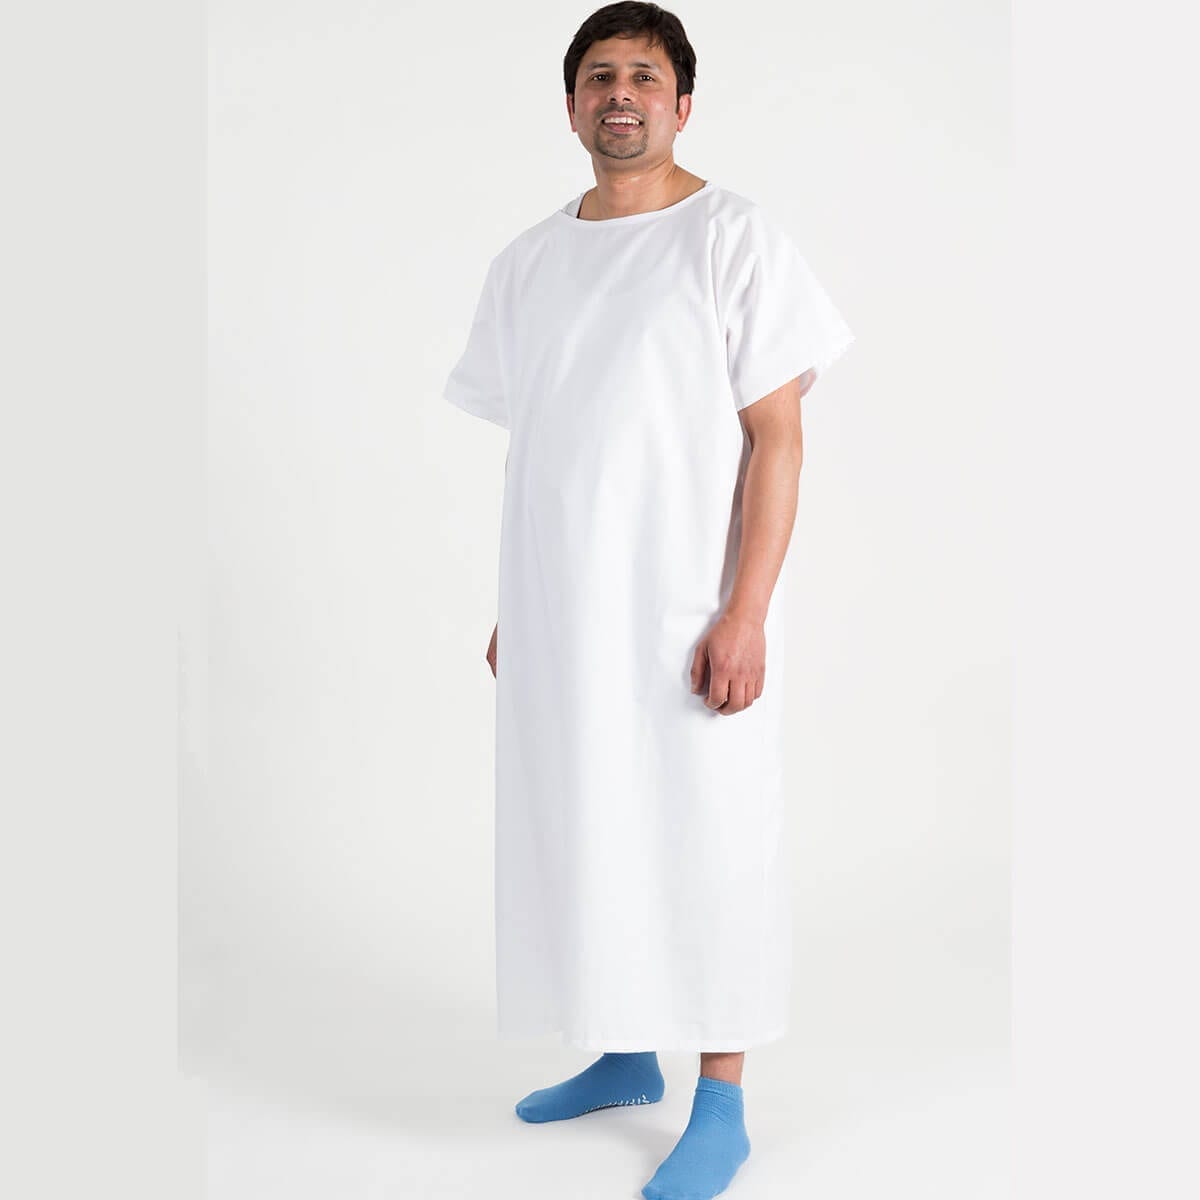 Hospital operation gown - front view